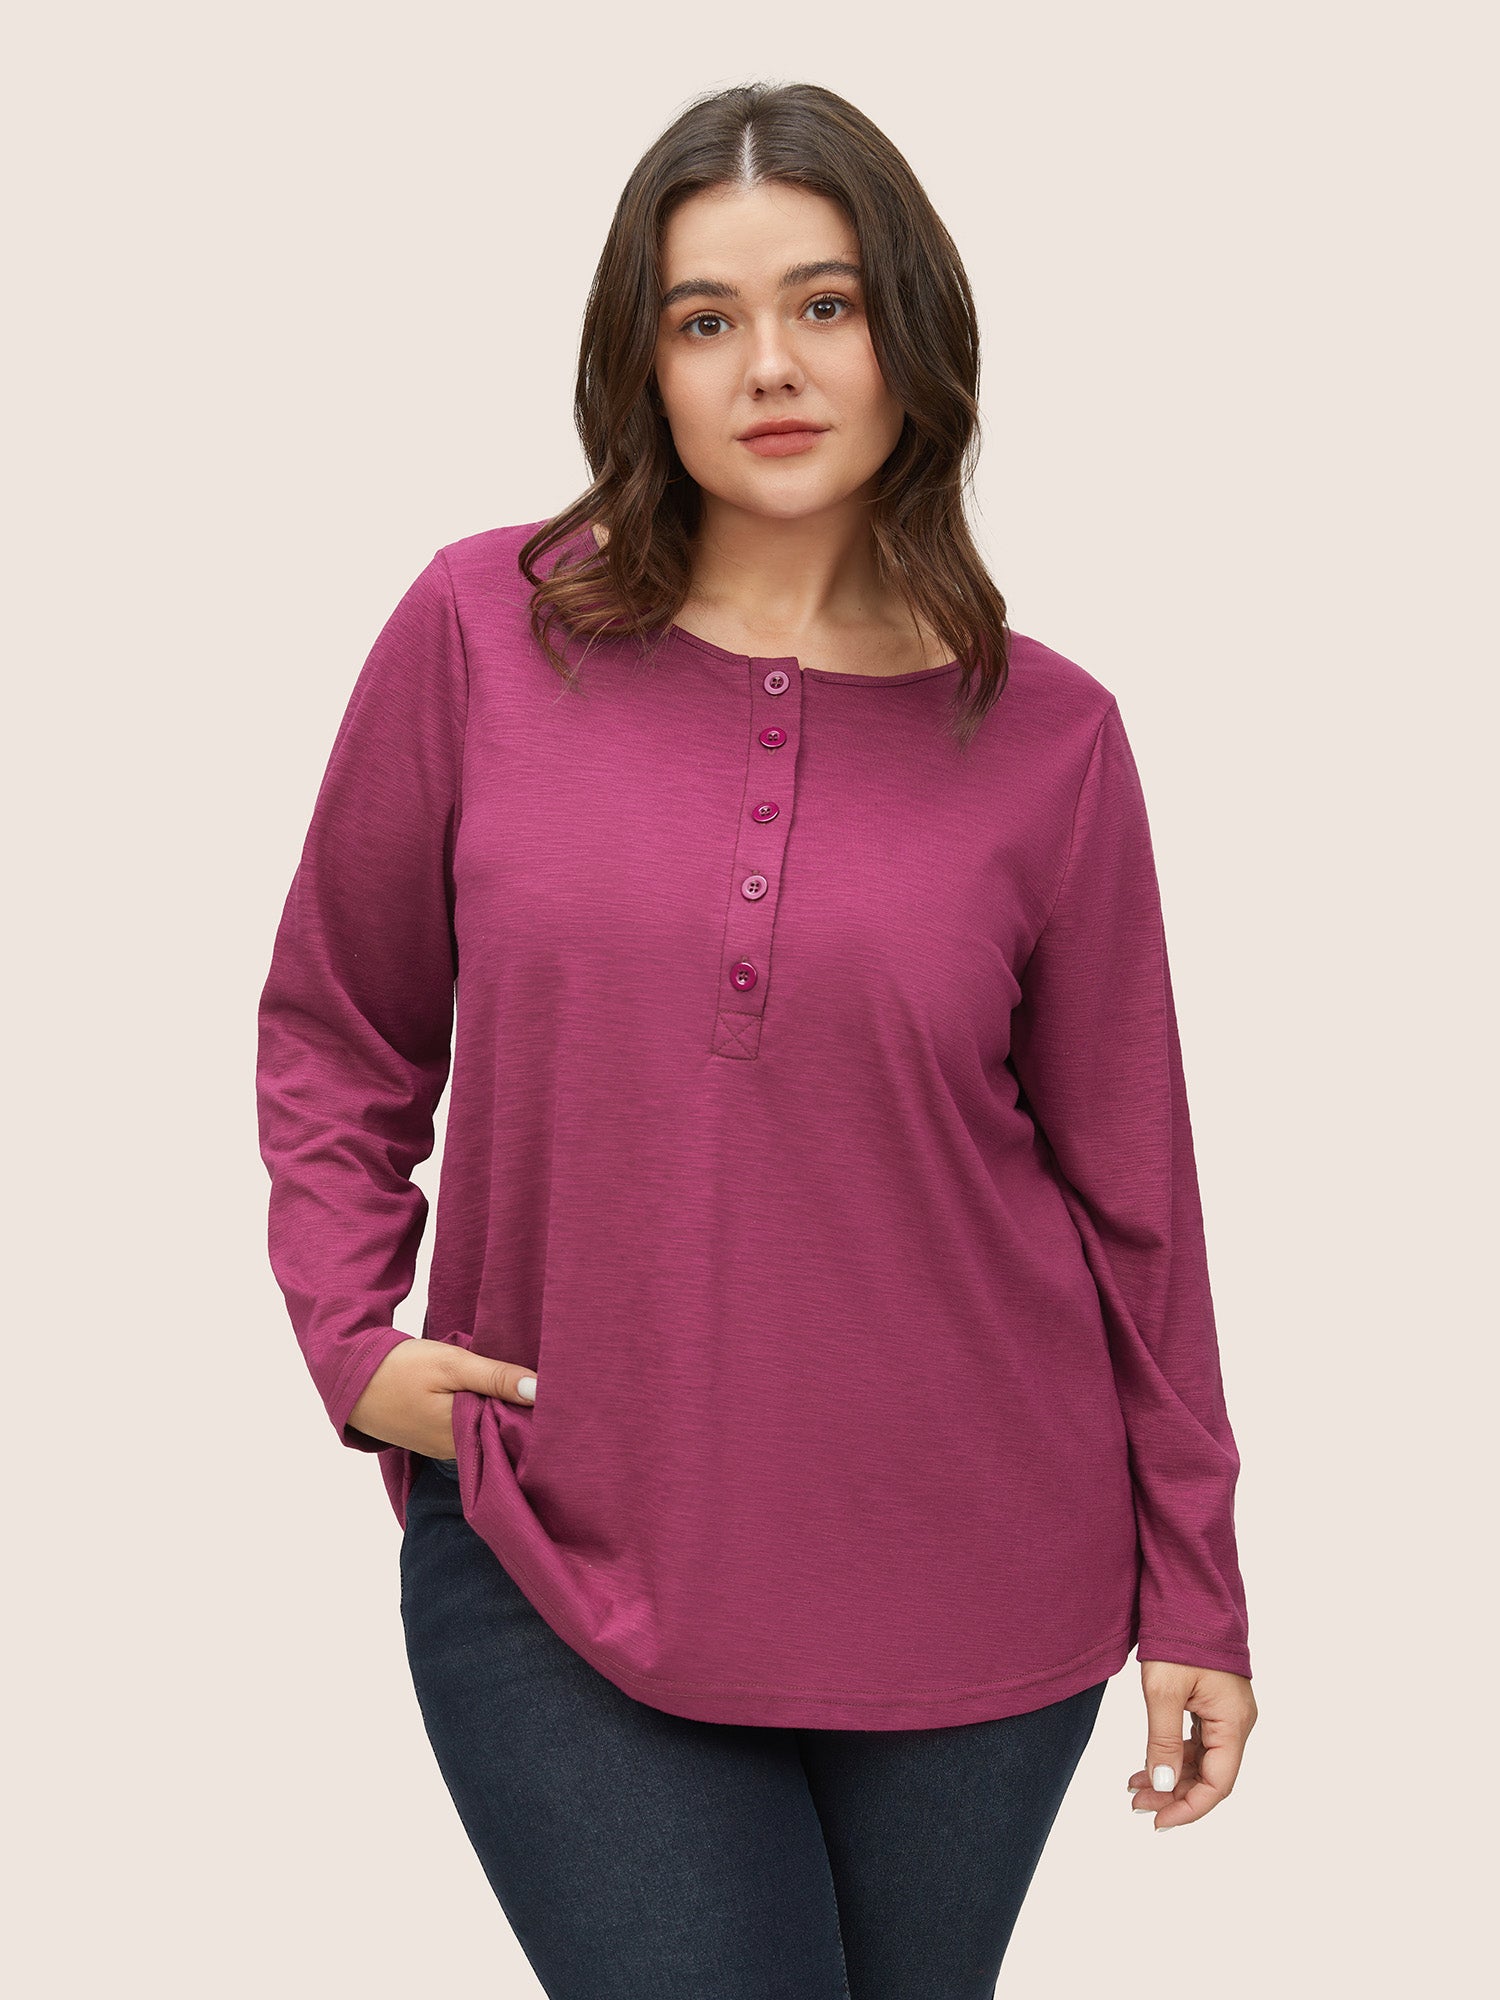 

Plus Size Women Everyday Plain Plain Regular Sleeve Long Sleeve Open Front Casual T-shirts BloomChic, Red-violet